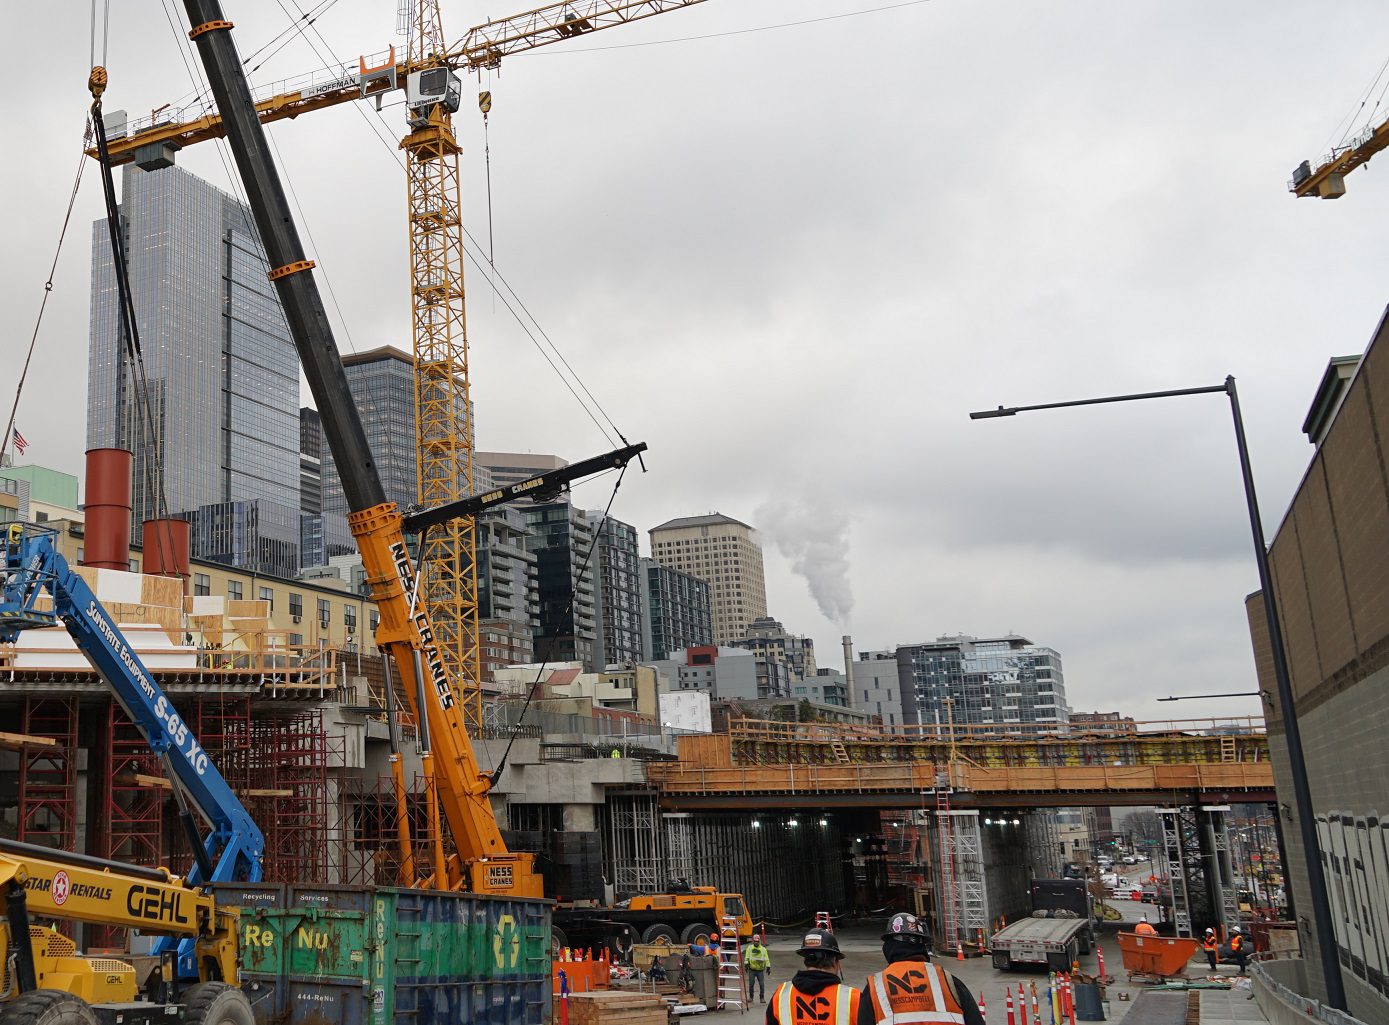 Construction workers on a construction site on a cloudy day. A large crane and temporary bridge false work are in the background, as well as several large buildings.